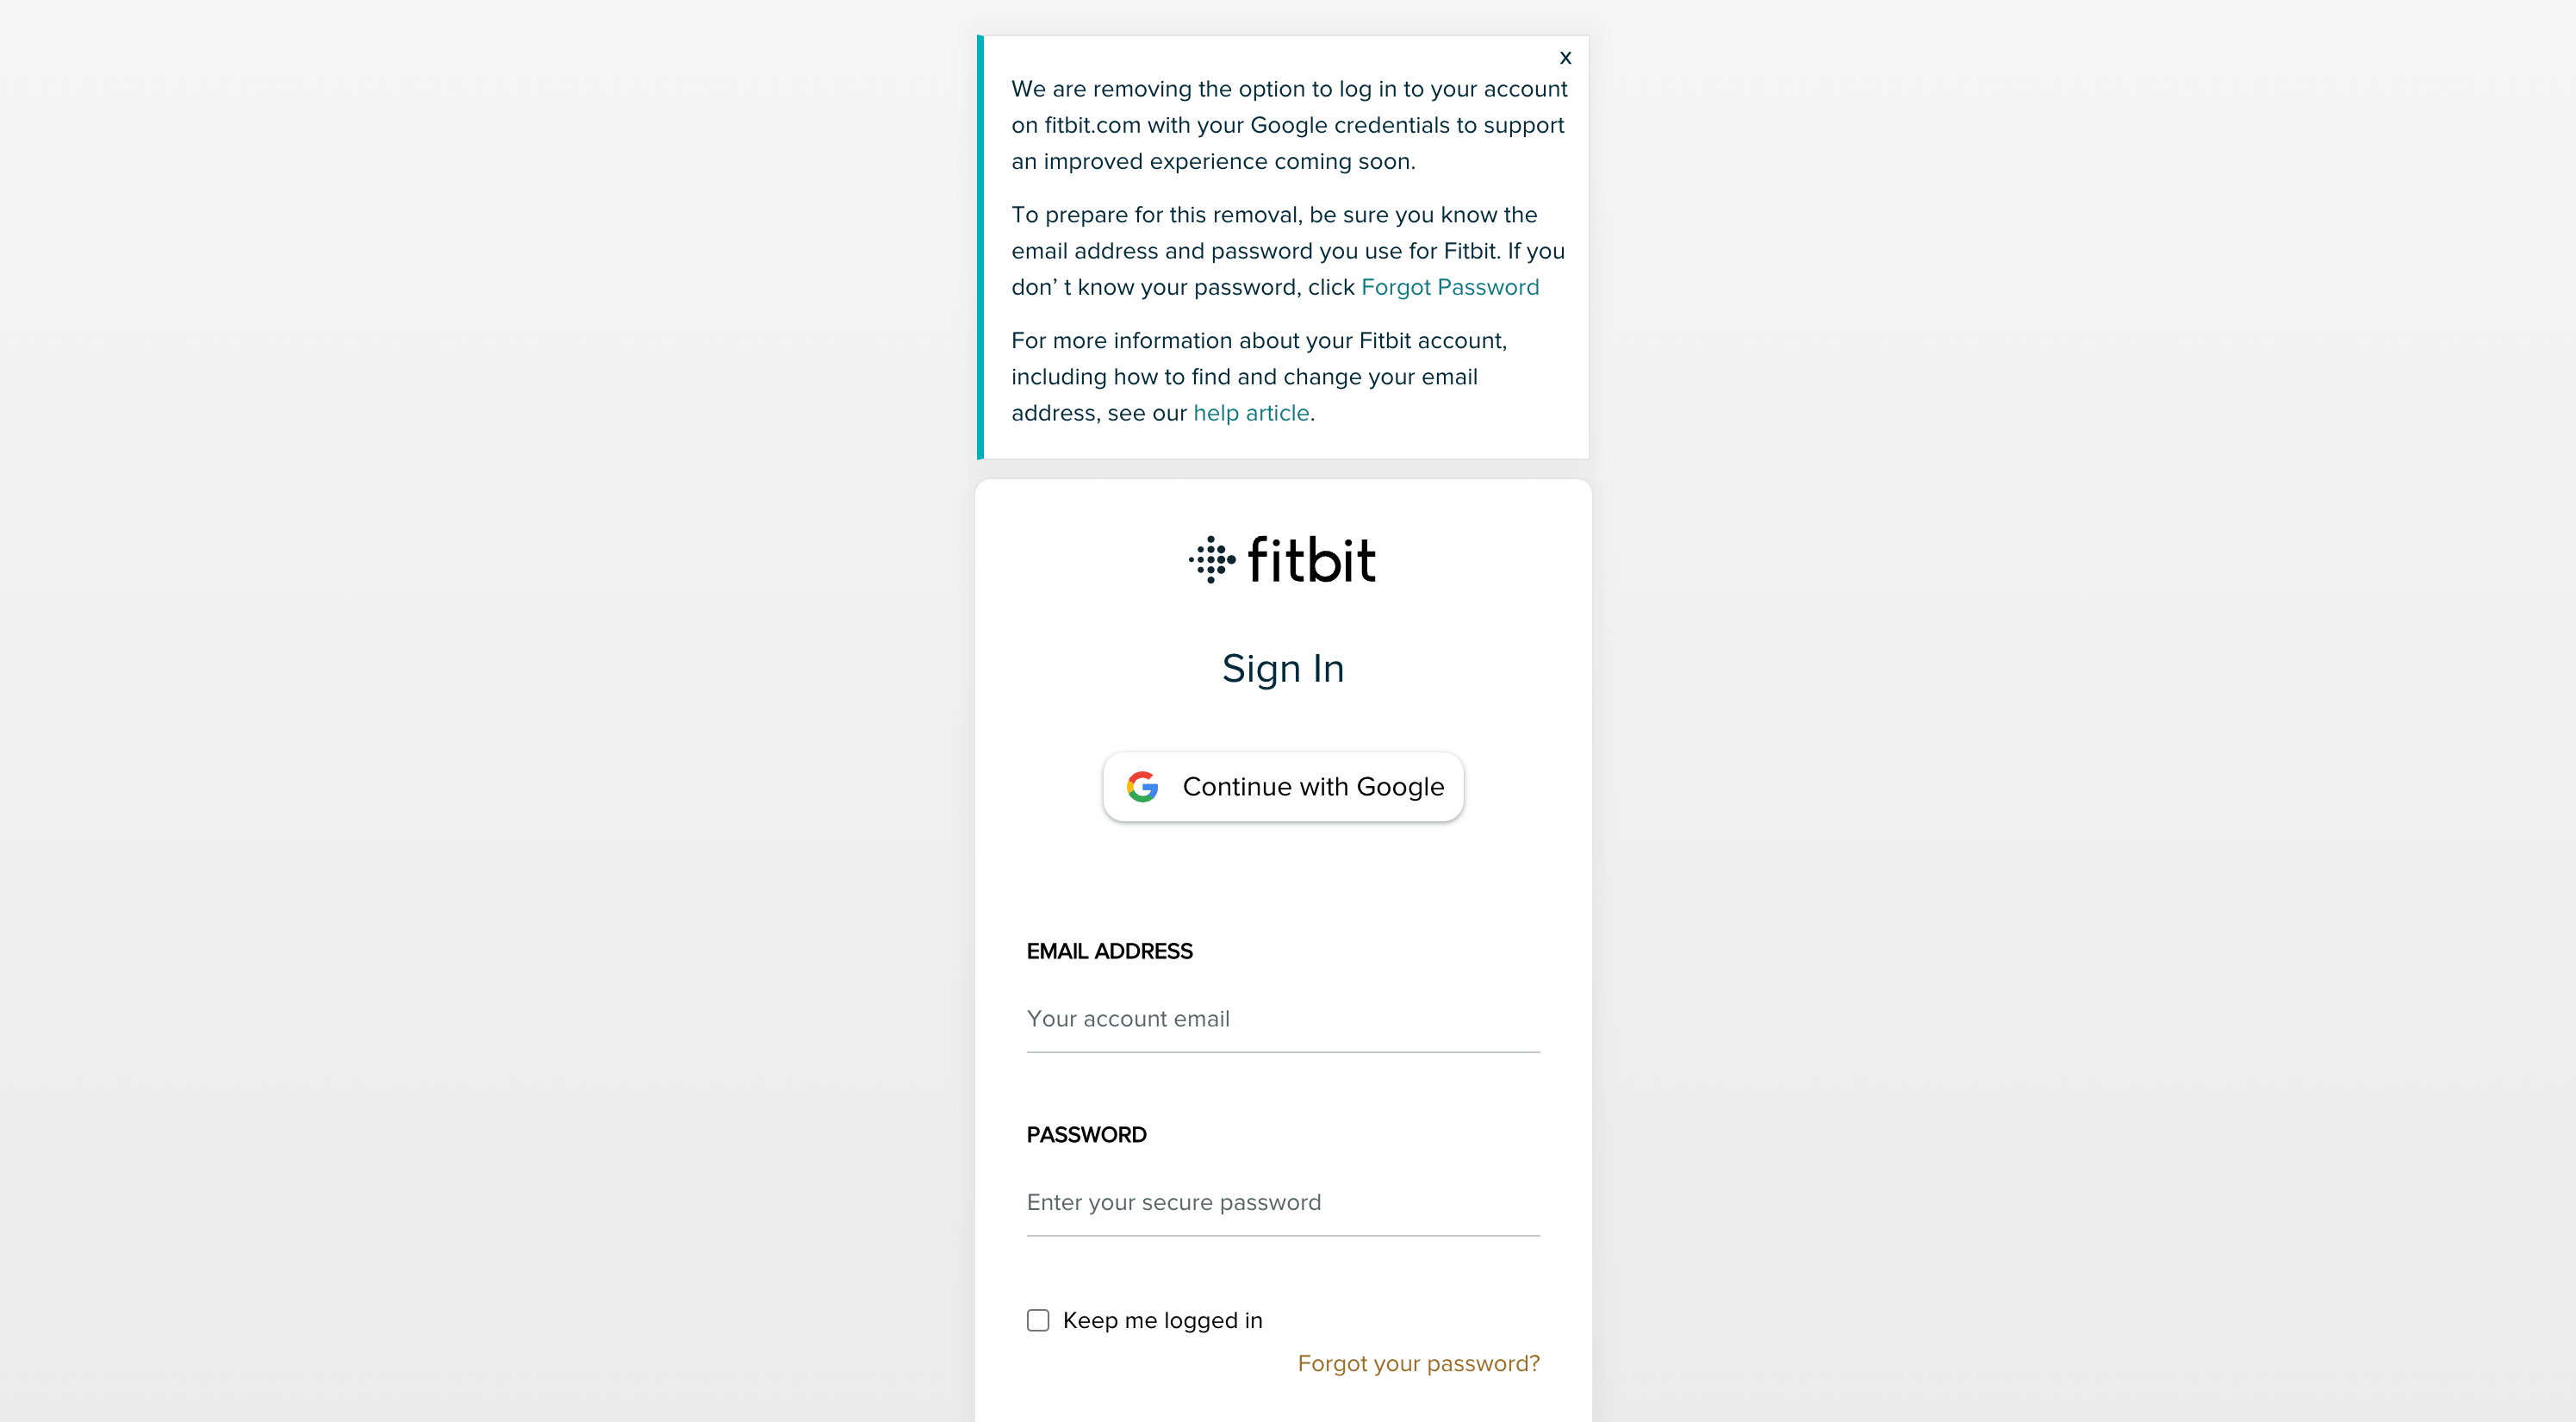 Fitbit Google Account warning message